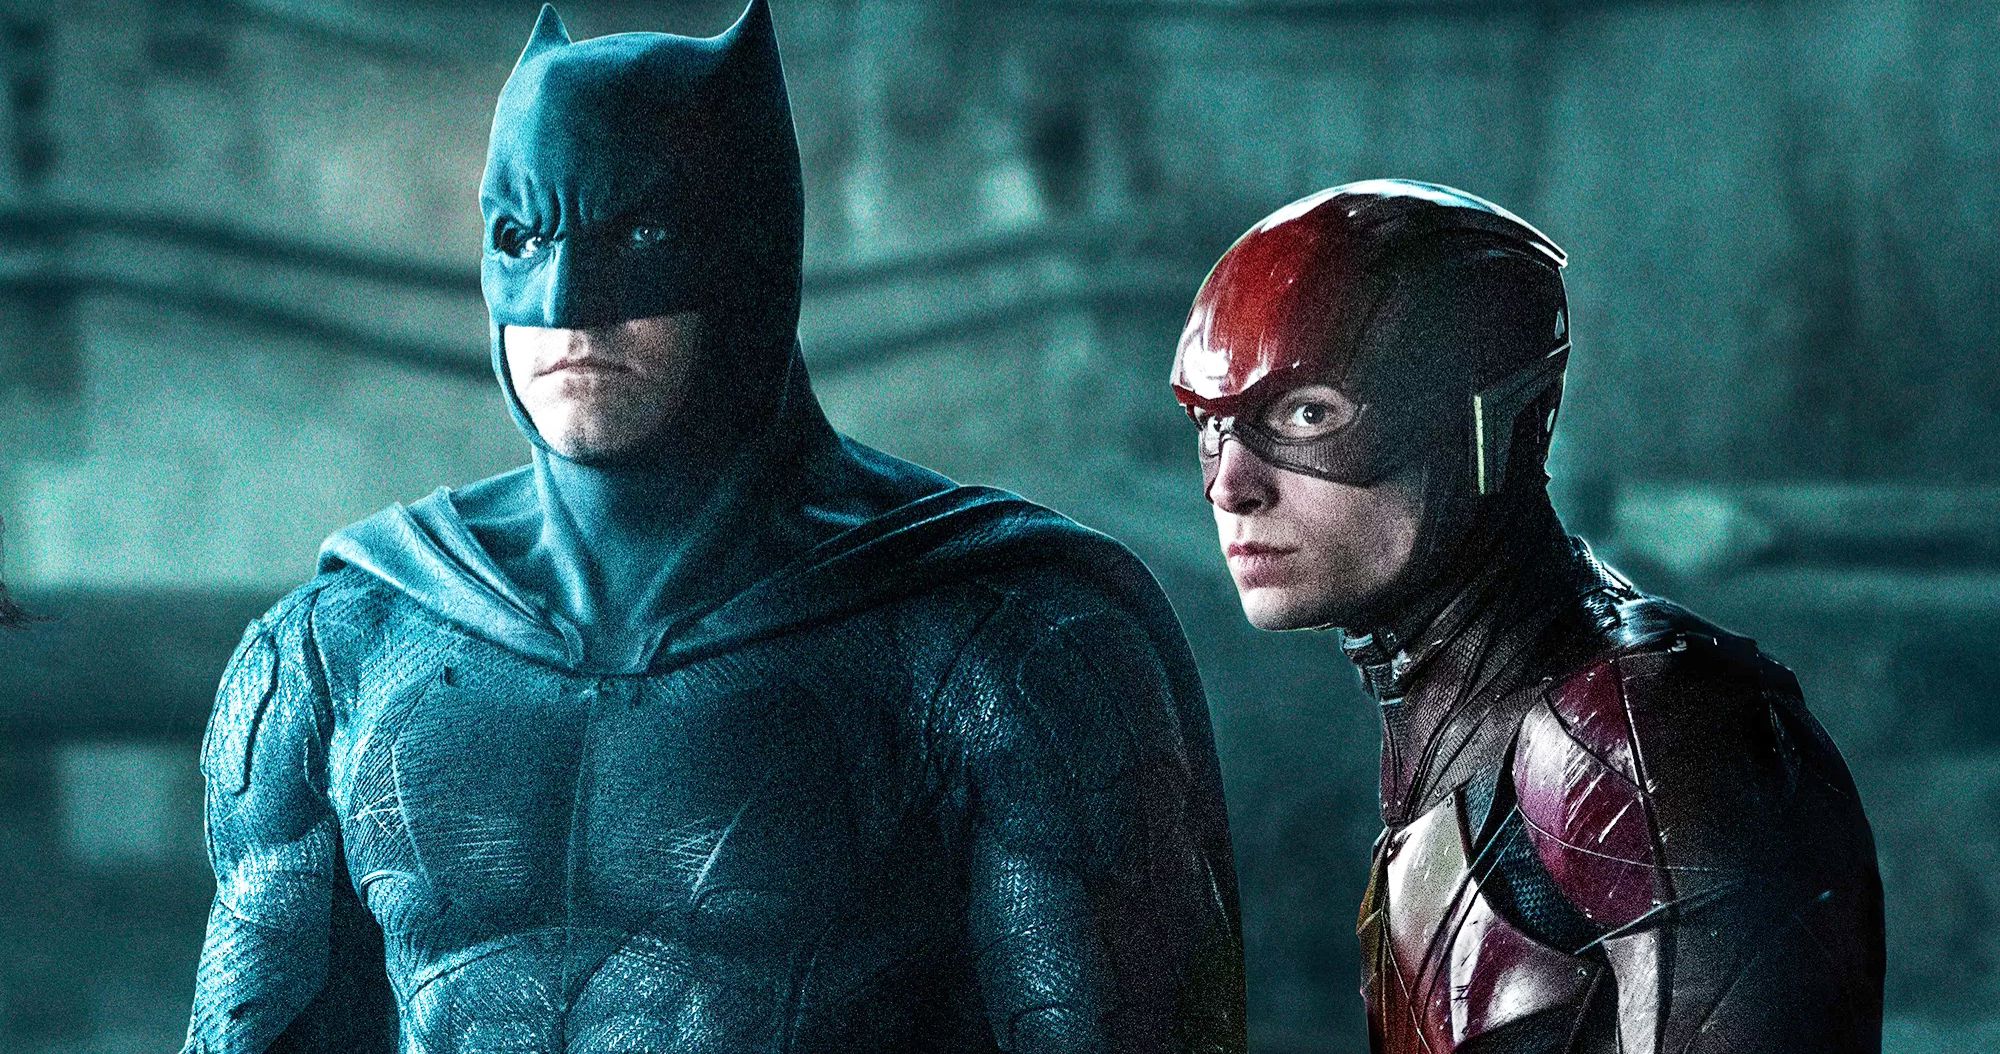 Ben Affleck's Batman Return in The Flash Movie May Not Amount to Much Screen Time